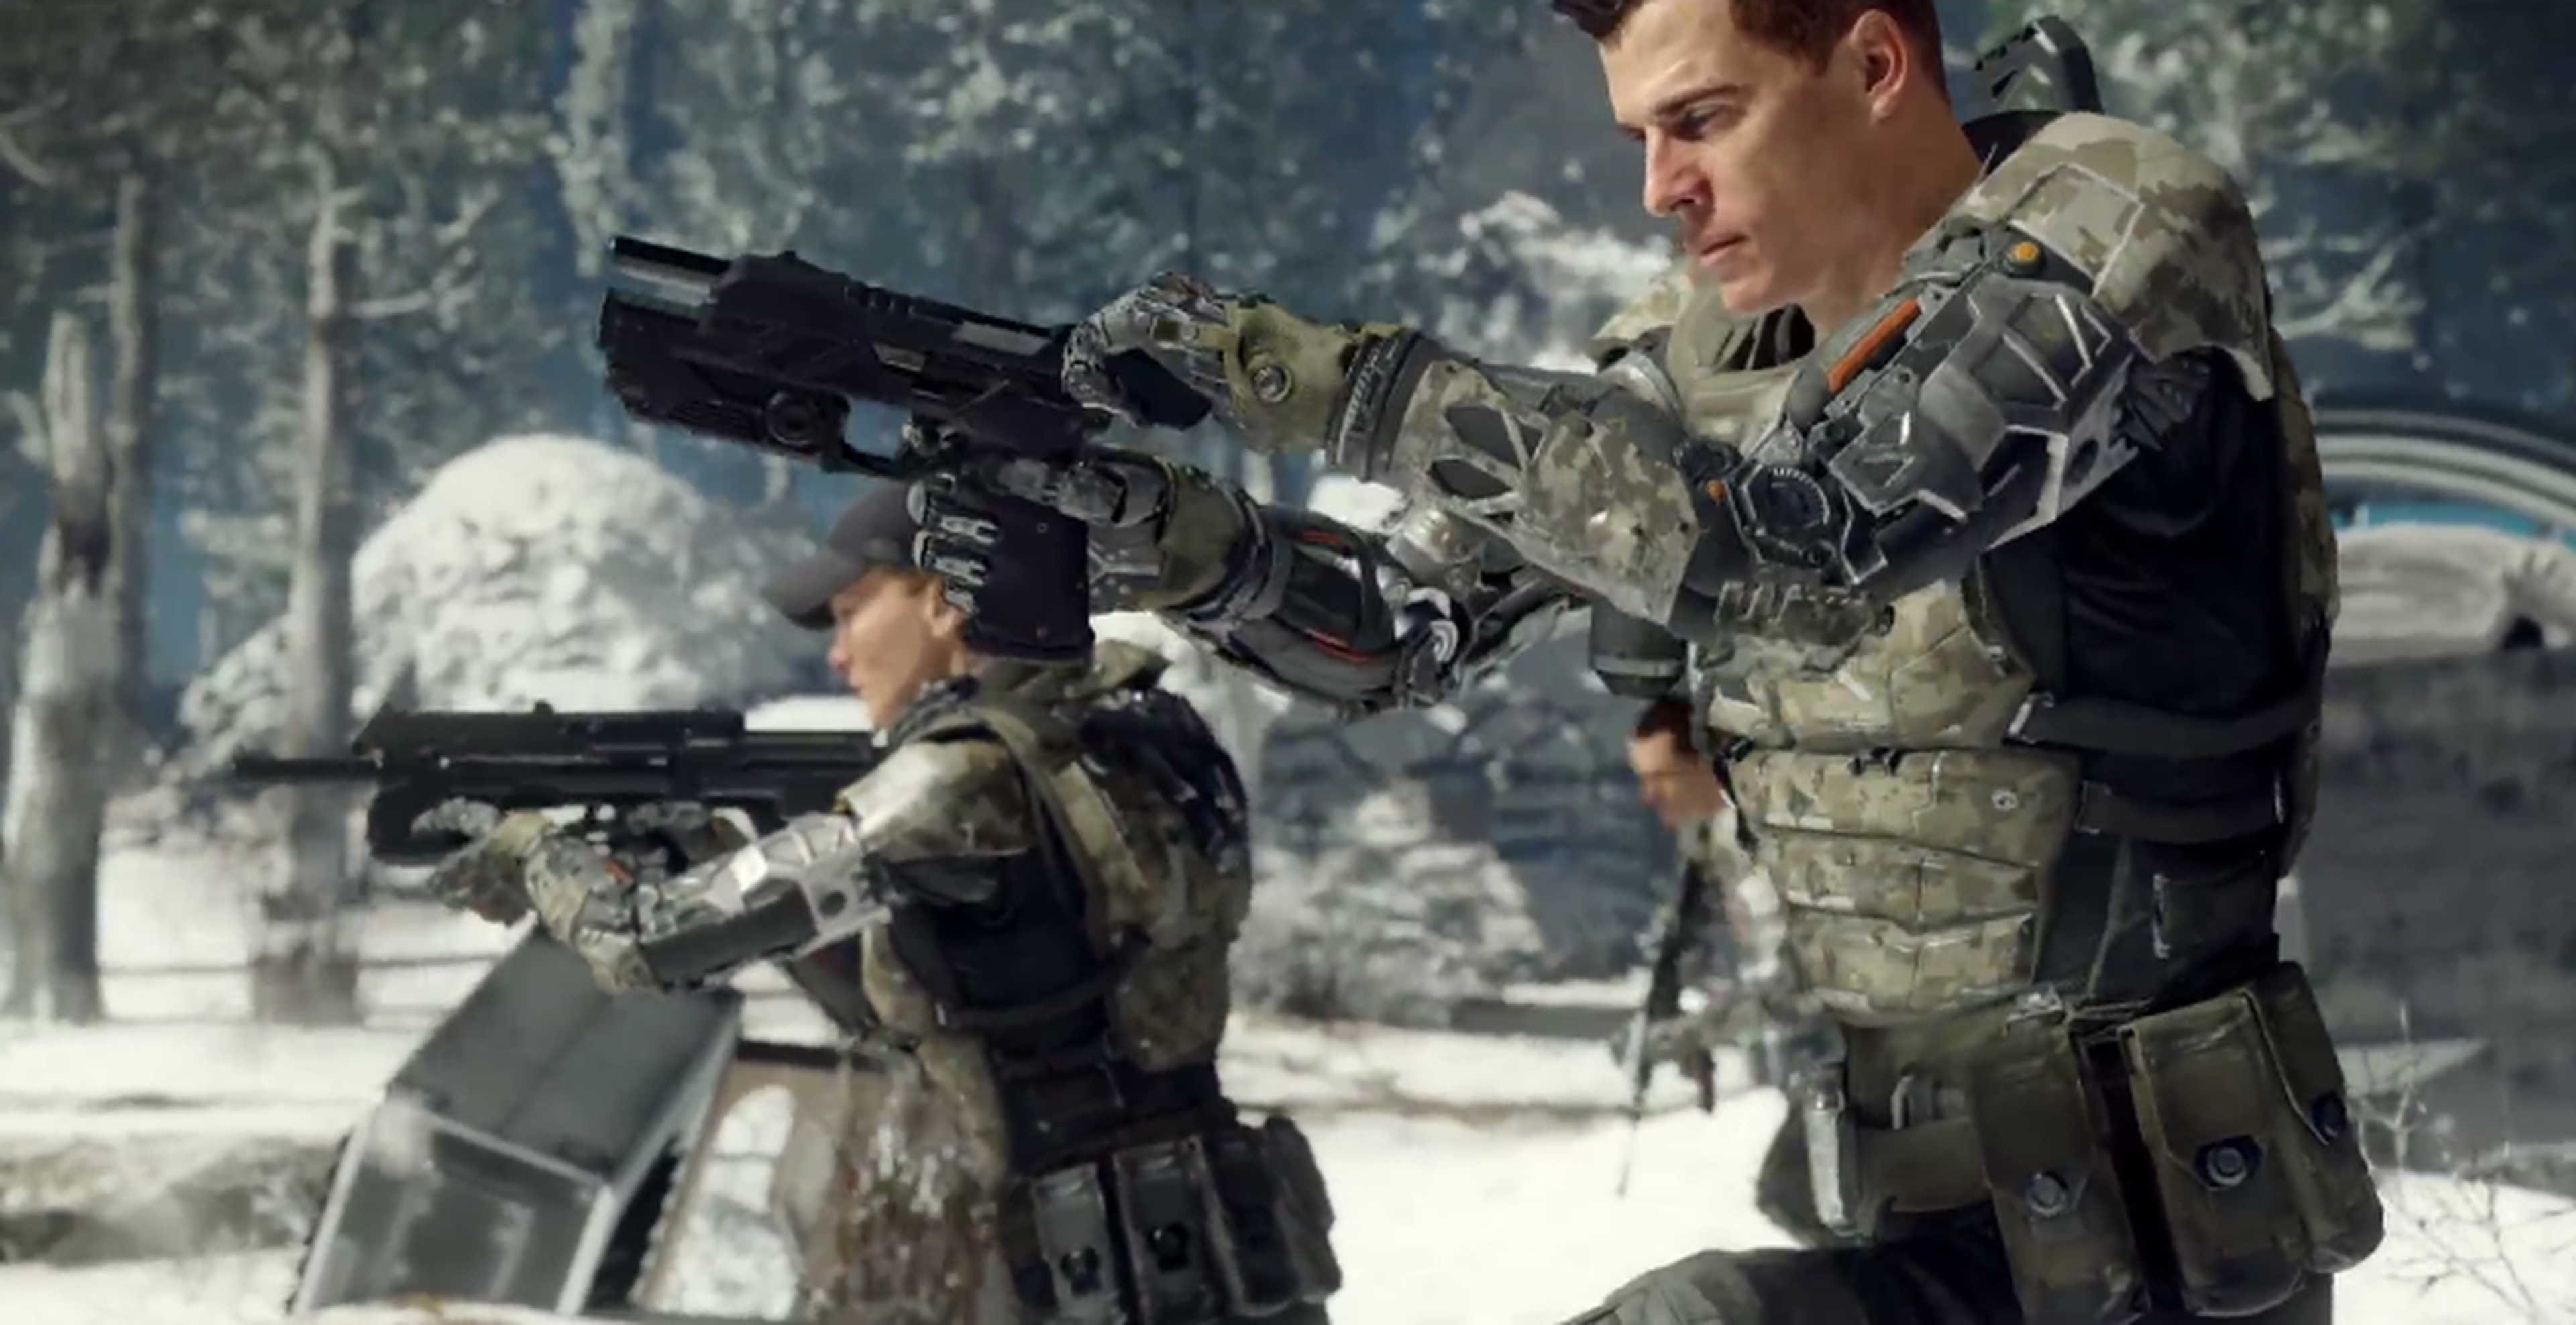 50 claves de Call of Duty Black Ops 3